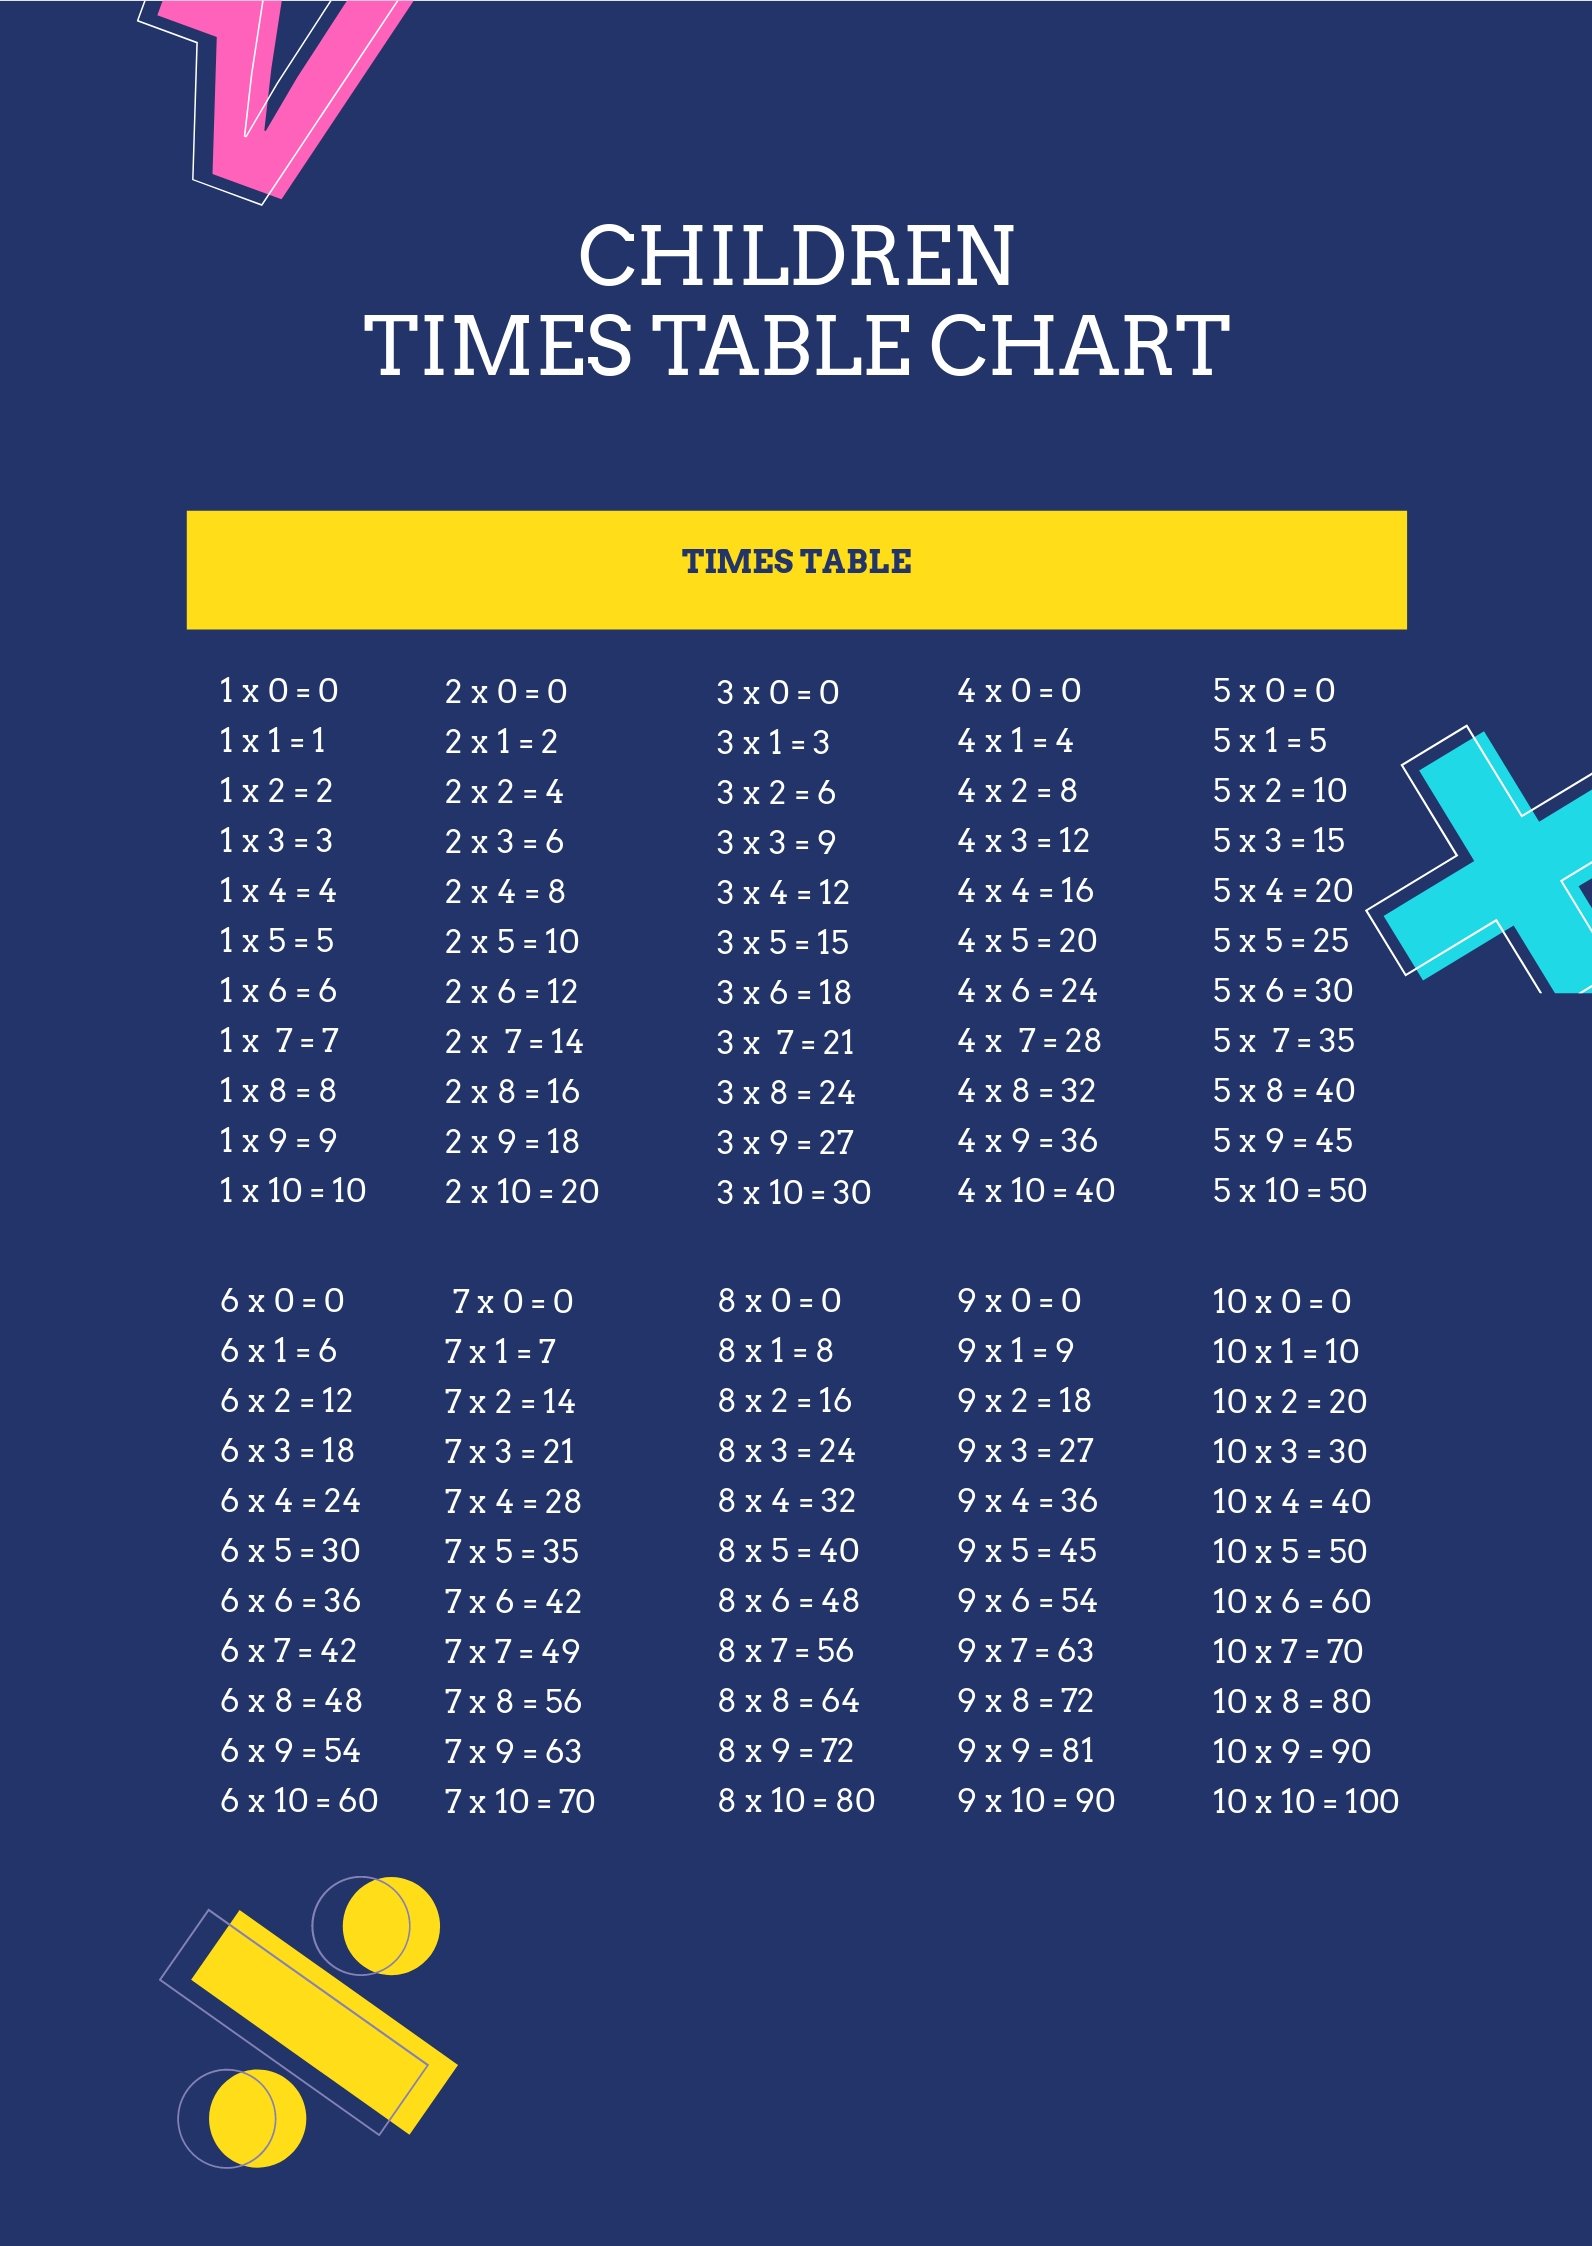 Children Times Tables Chart Template